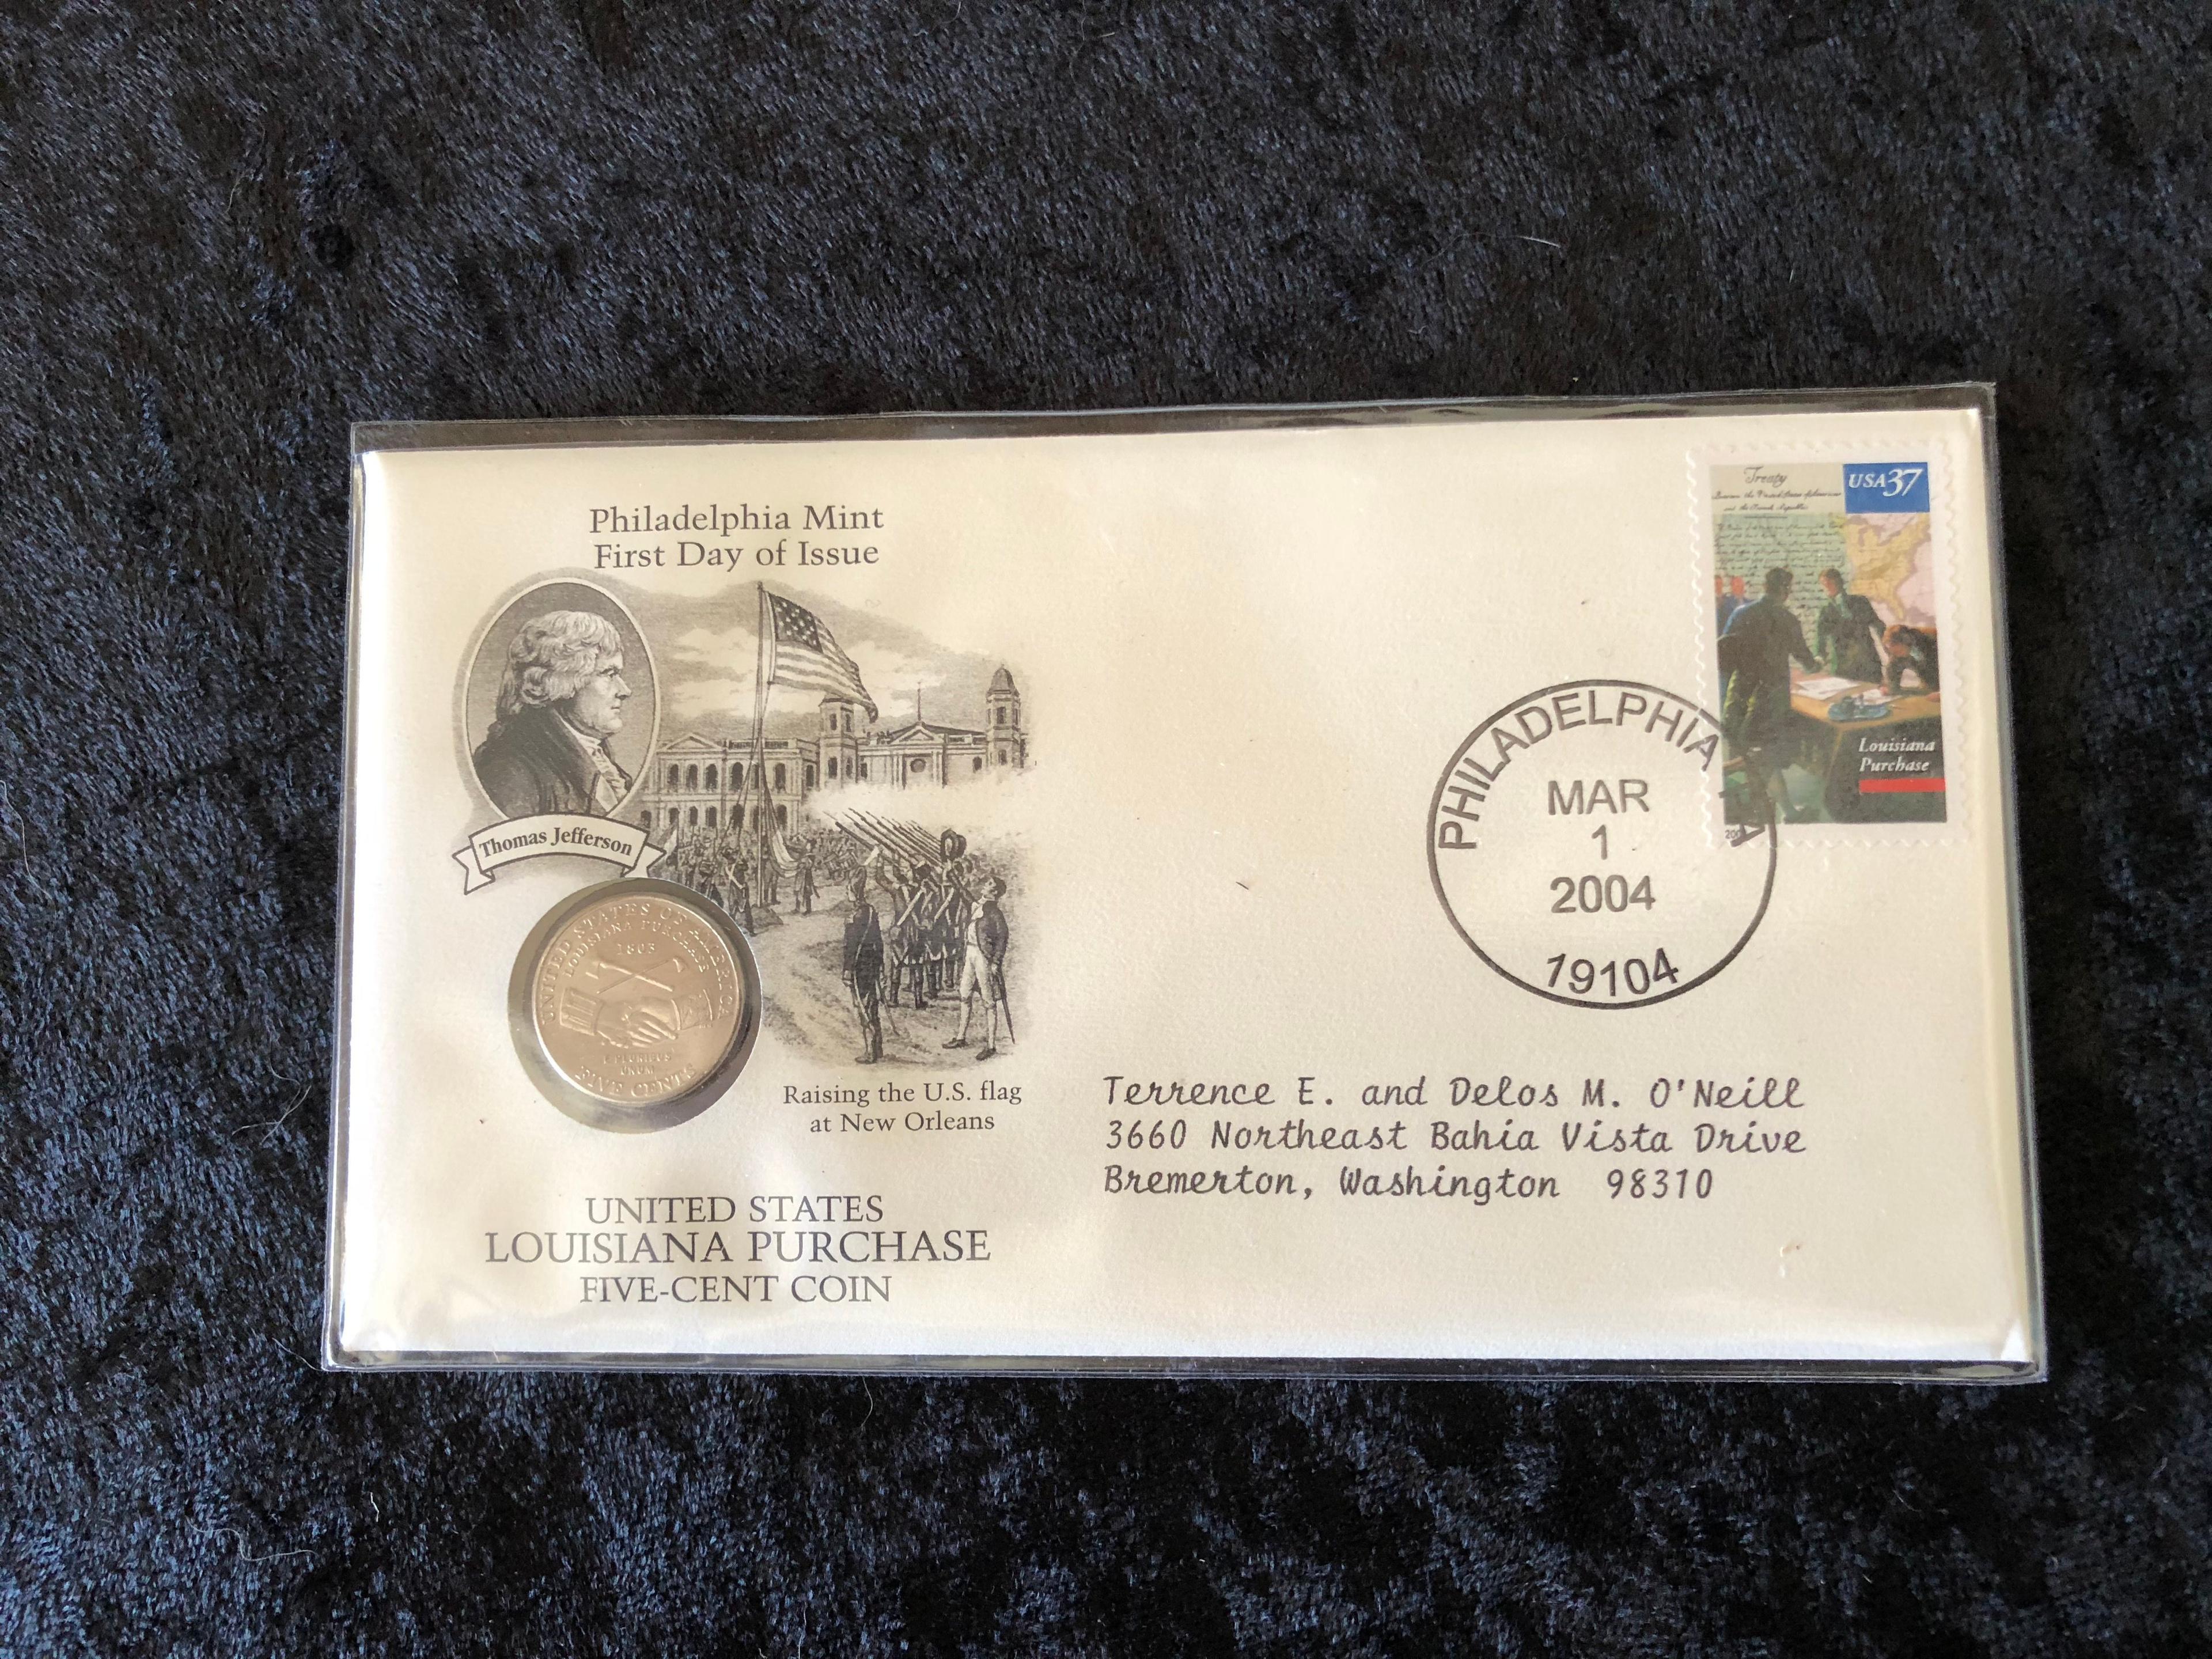 George Washington Postage Stamp and Louisiana Collectible Coins